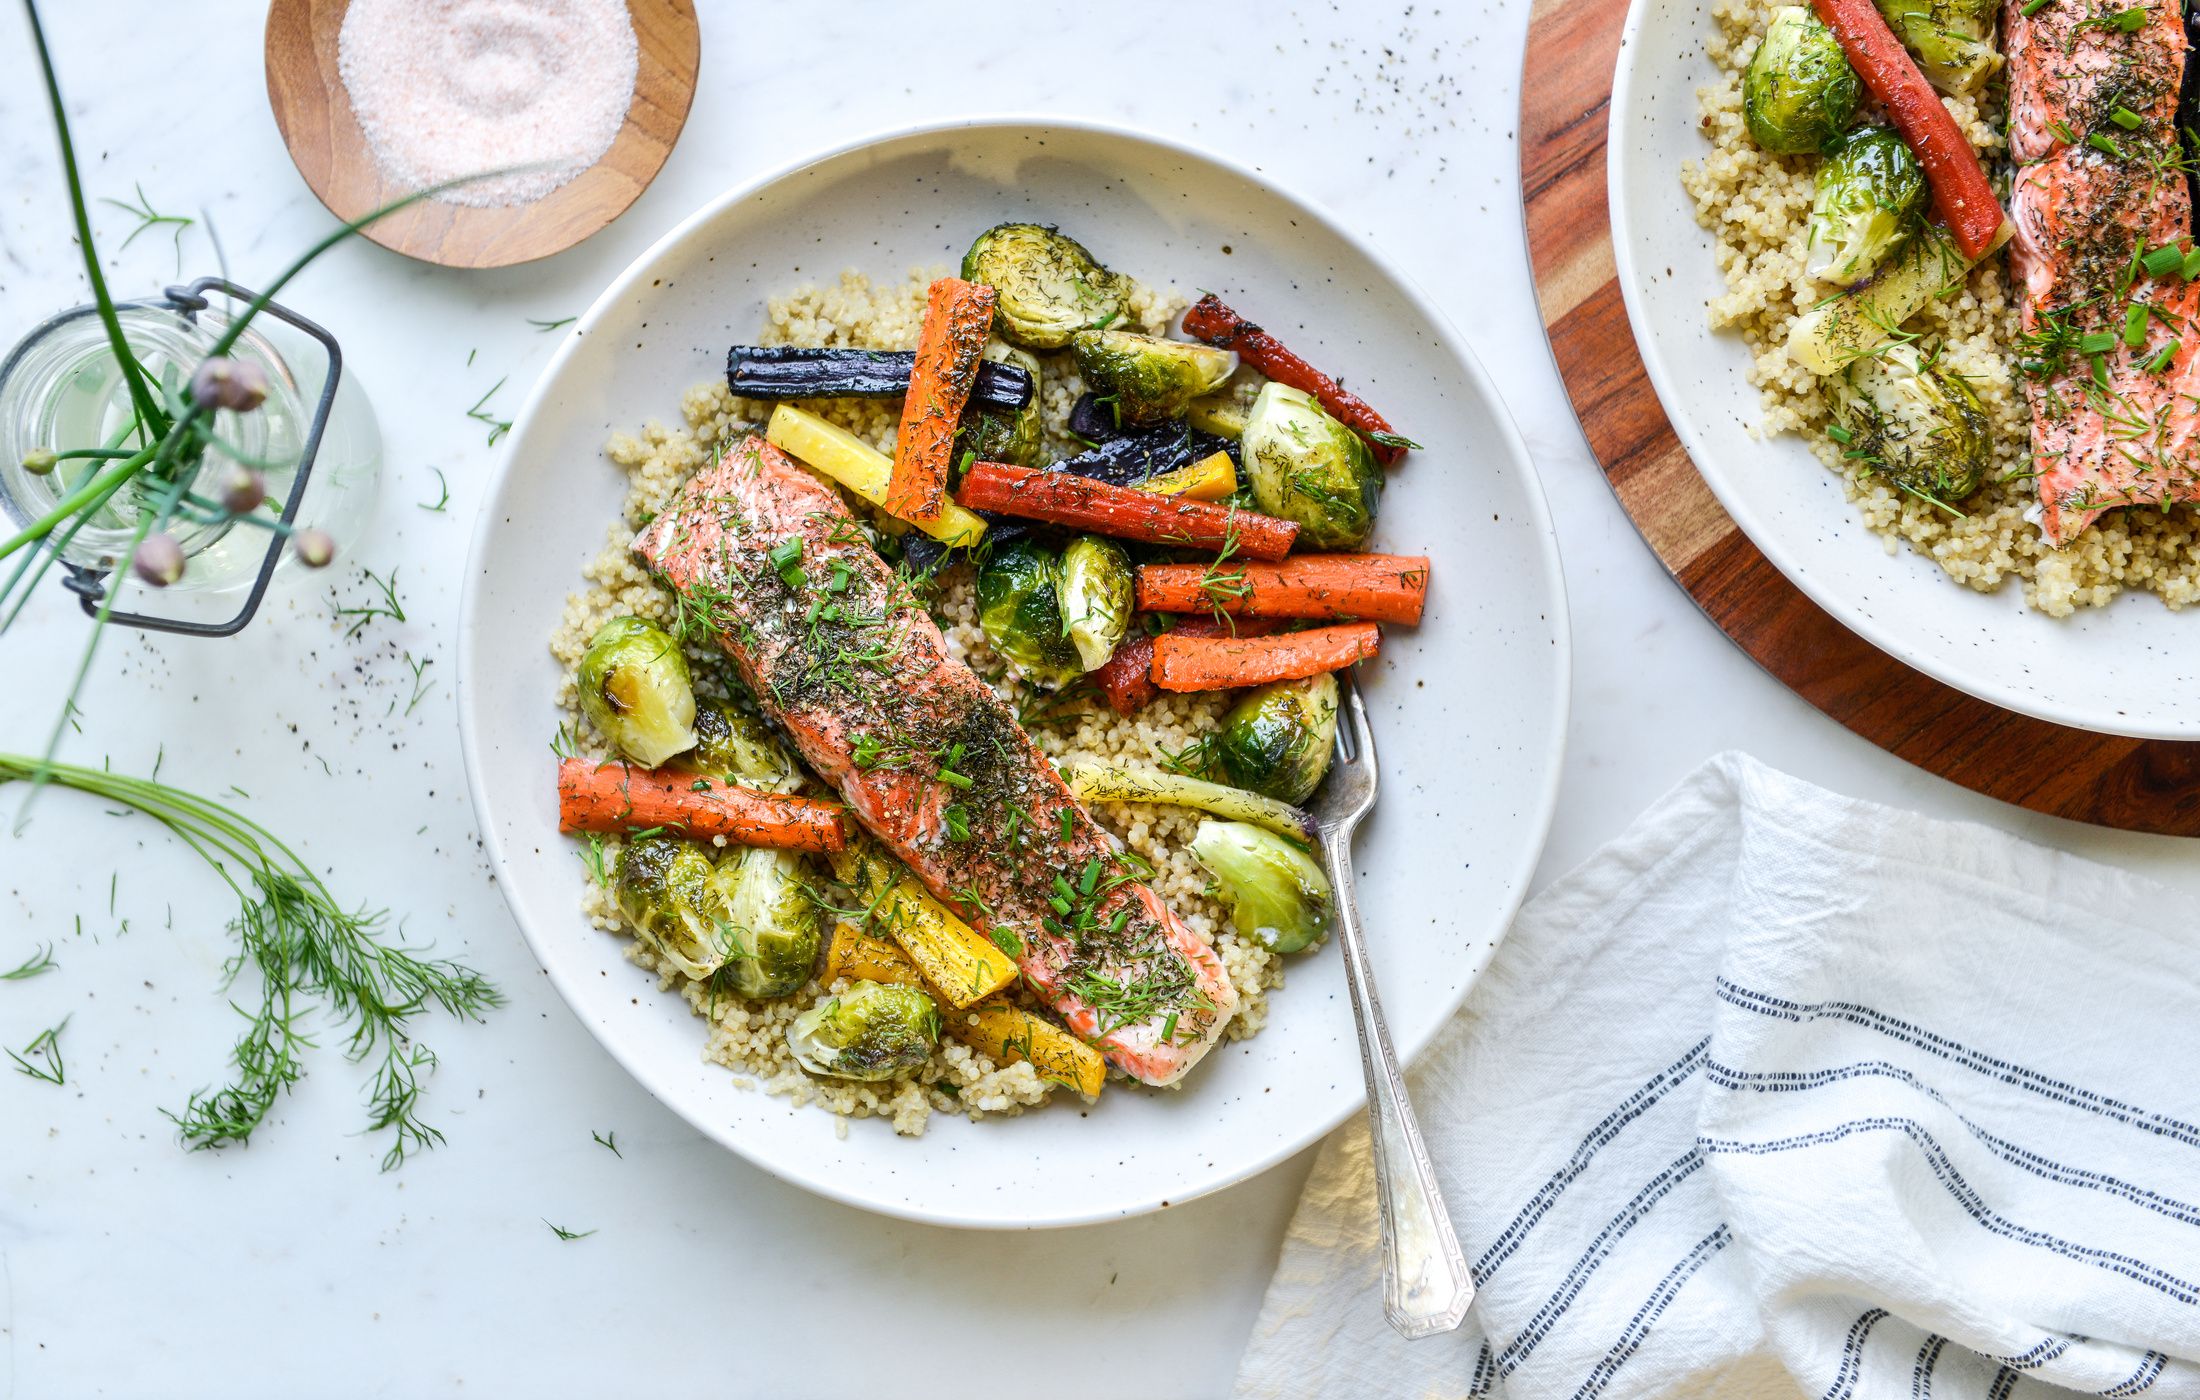 SHEET PAN DILLED SALMON BRUSSELS CARROTS-1